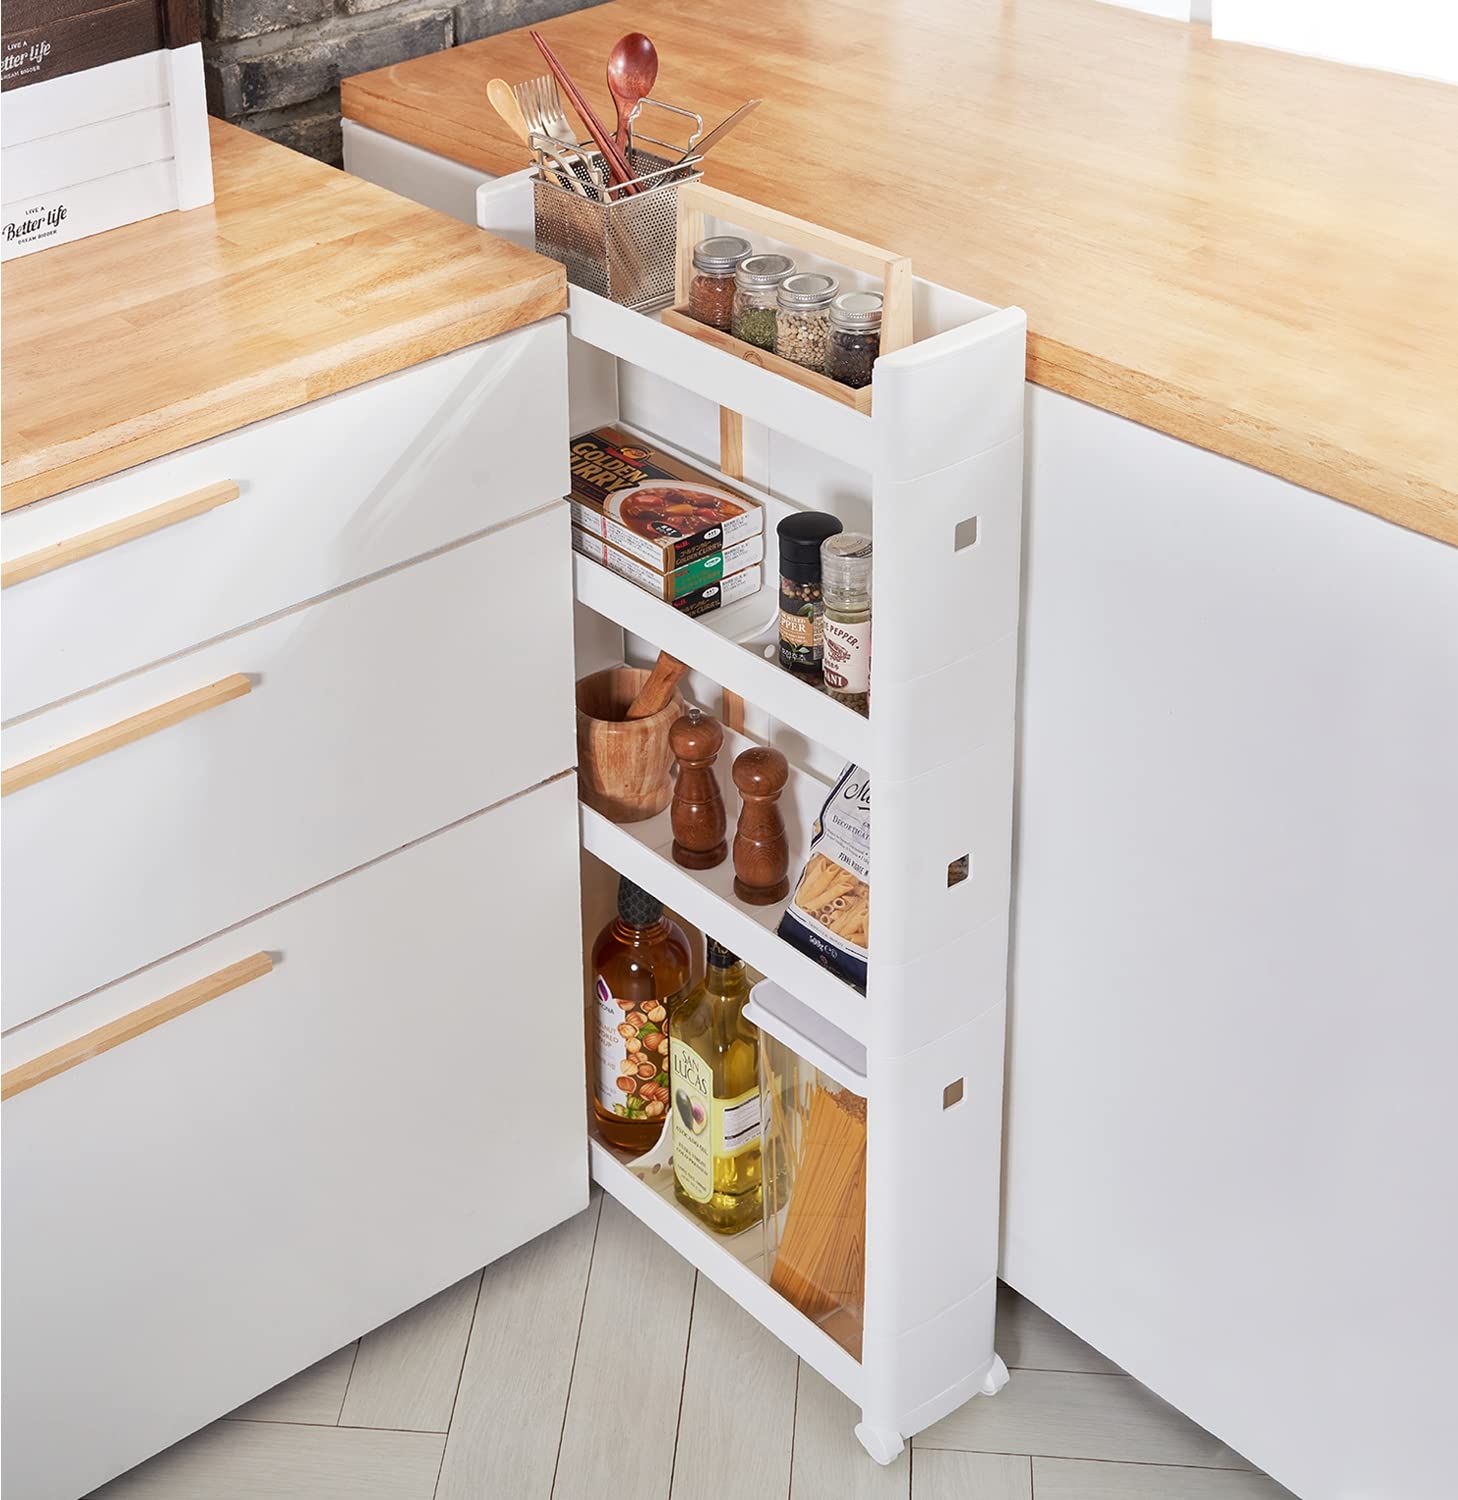 Reasons Why a Kitchen Cart is a Must-Have Addition to Your Culinary Space